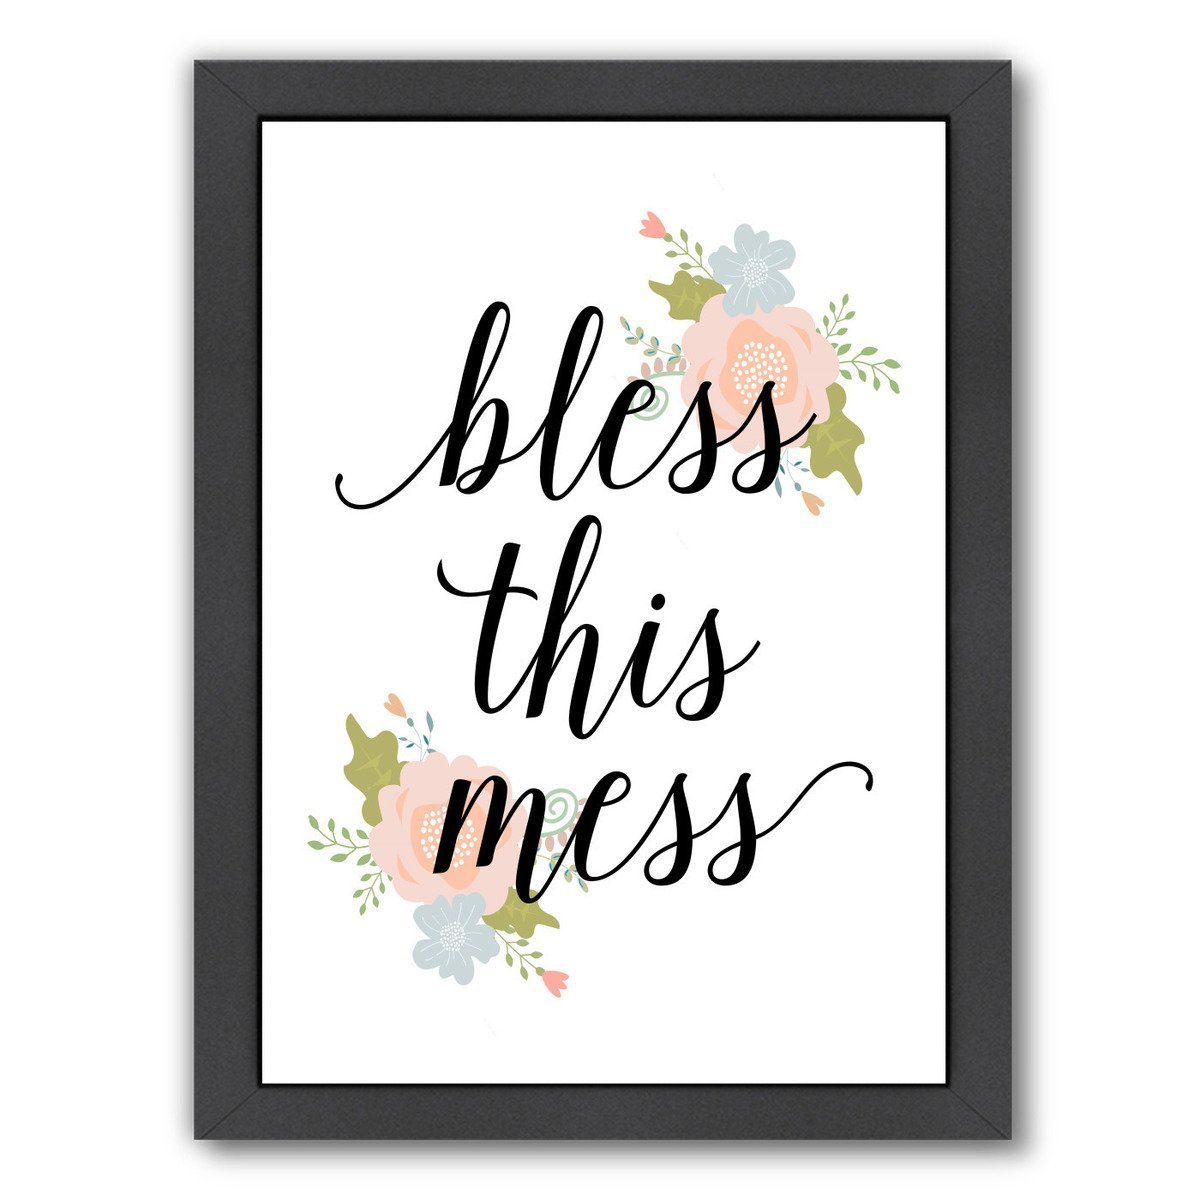 Bless This Mess by Samantha Ranlet Framed Print - Americanflat